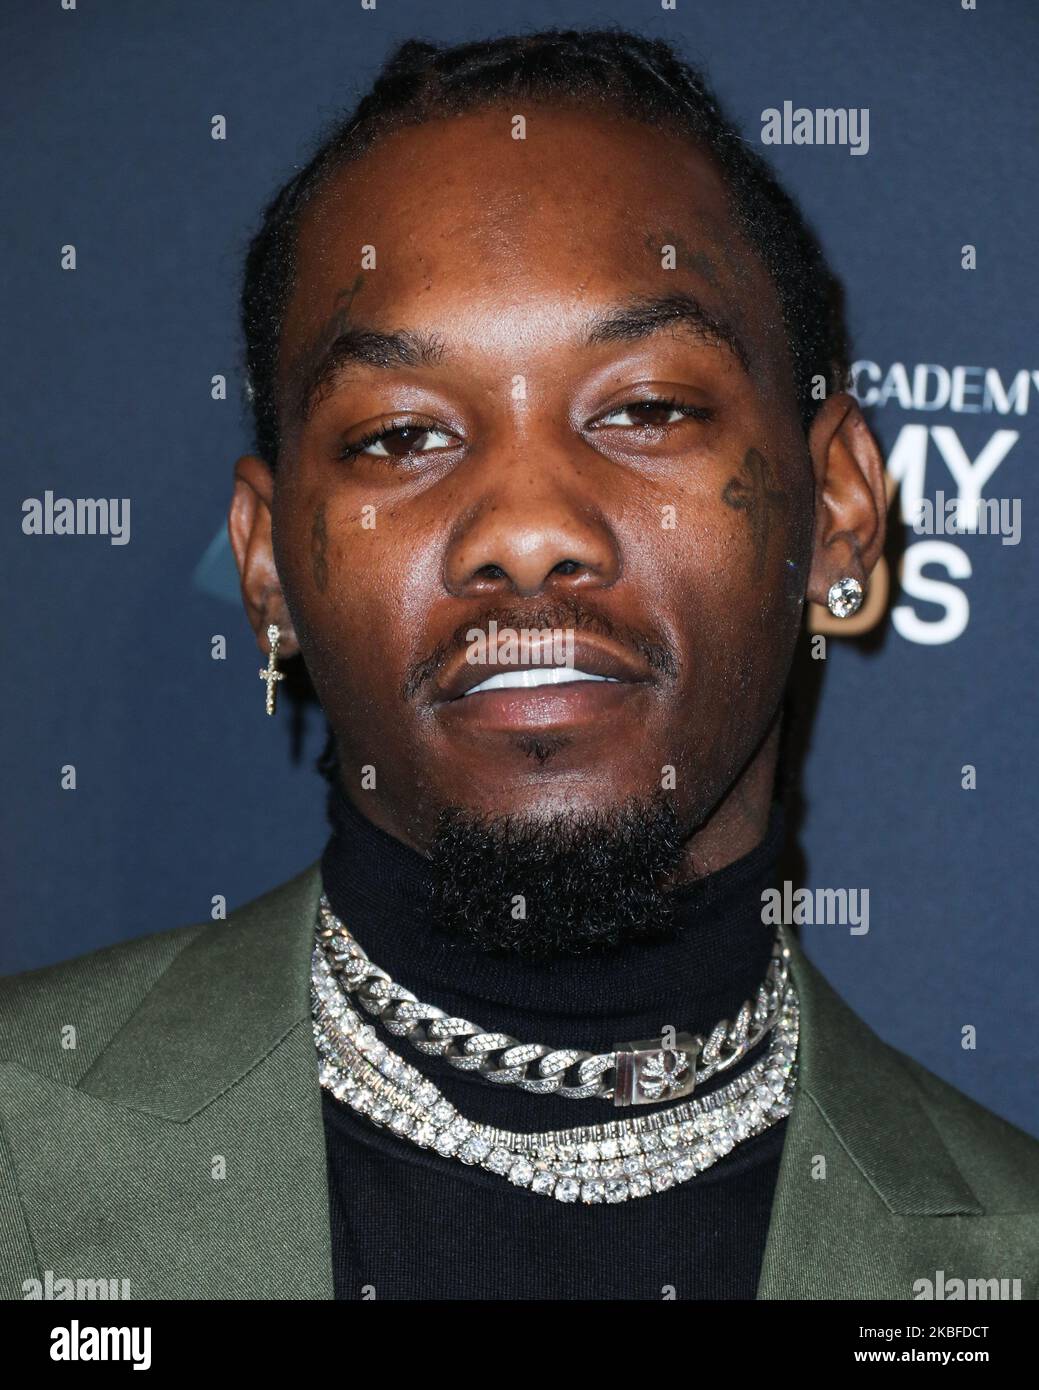 BEVERLY HILLS, LOS ANGELES, CALIFORNIA, USA - JANUARY 25: Offset arrives at The Recording Academy And Clive Davis' 2020 Pre-GRAMMY Gala held at The Beverly Hilton Hotel on January 25, 2020 in Beverly Hills, Los Angeles, California, United States. (Photo by Xavier Collin/Image Press Agency/NurPhoto) Stock Photo